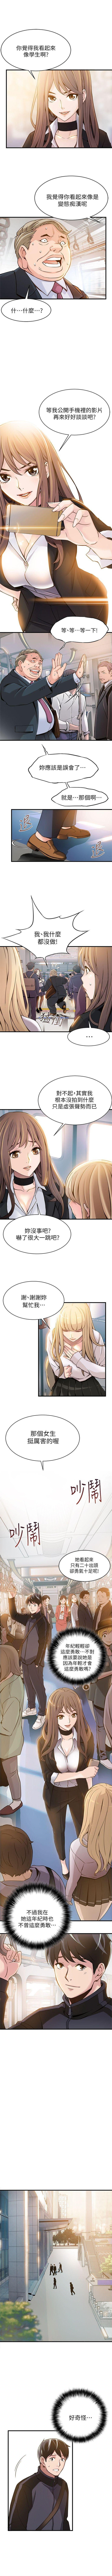 Pissing 弱點 1-94 官方中文（連載中） Female - Page 10